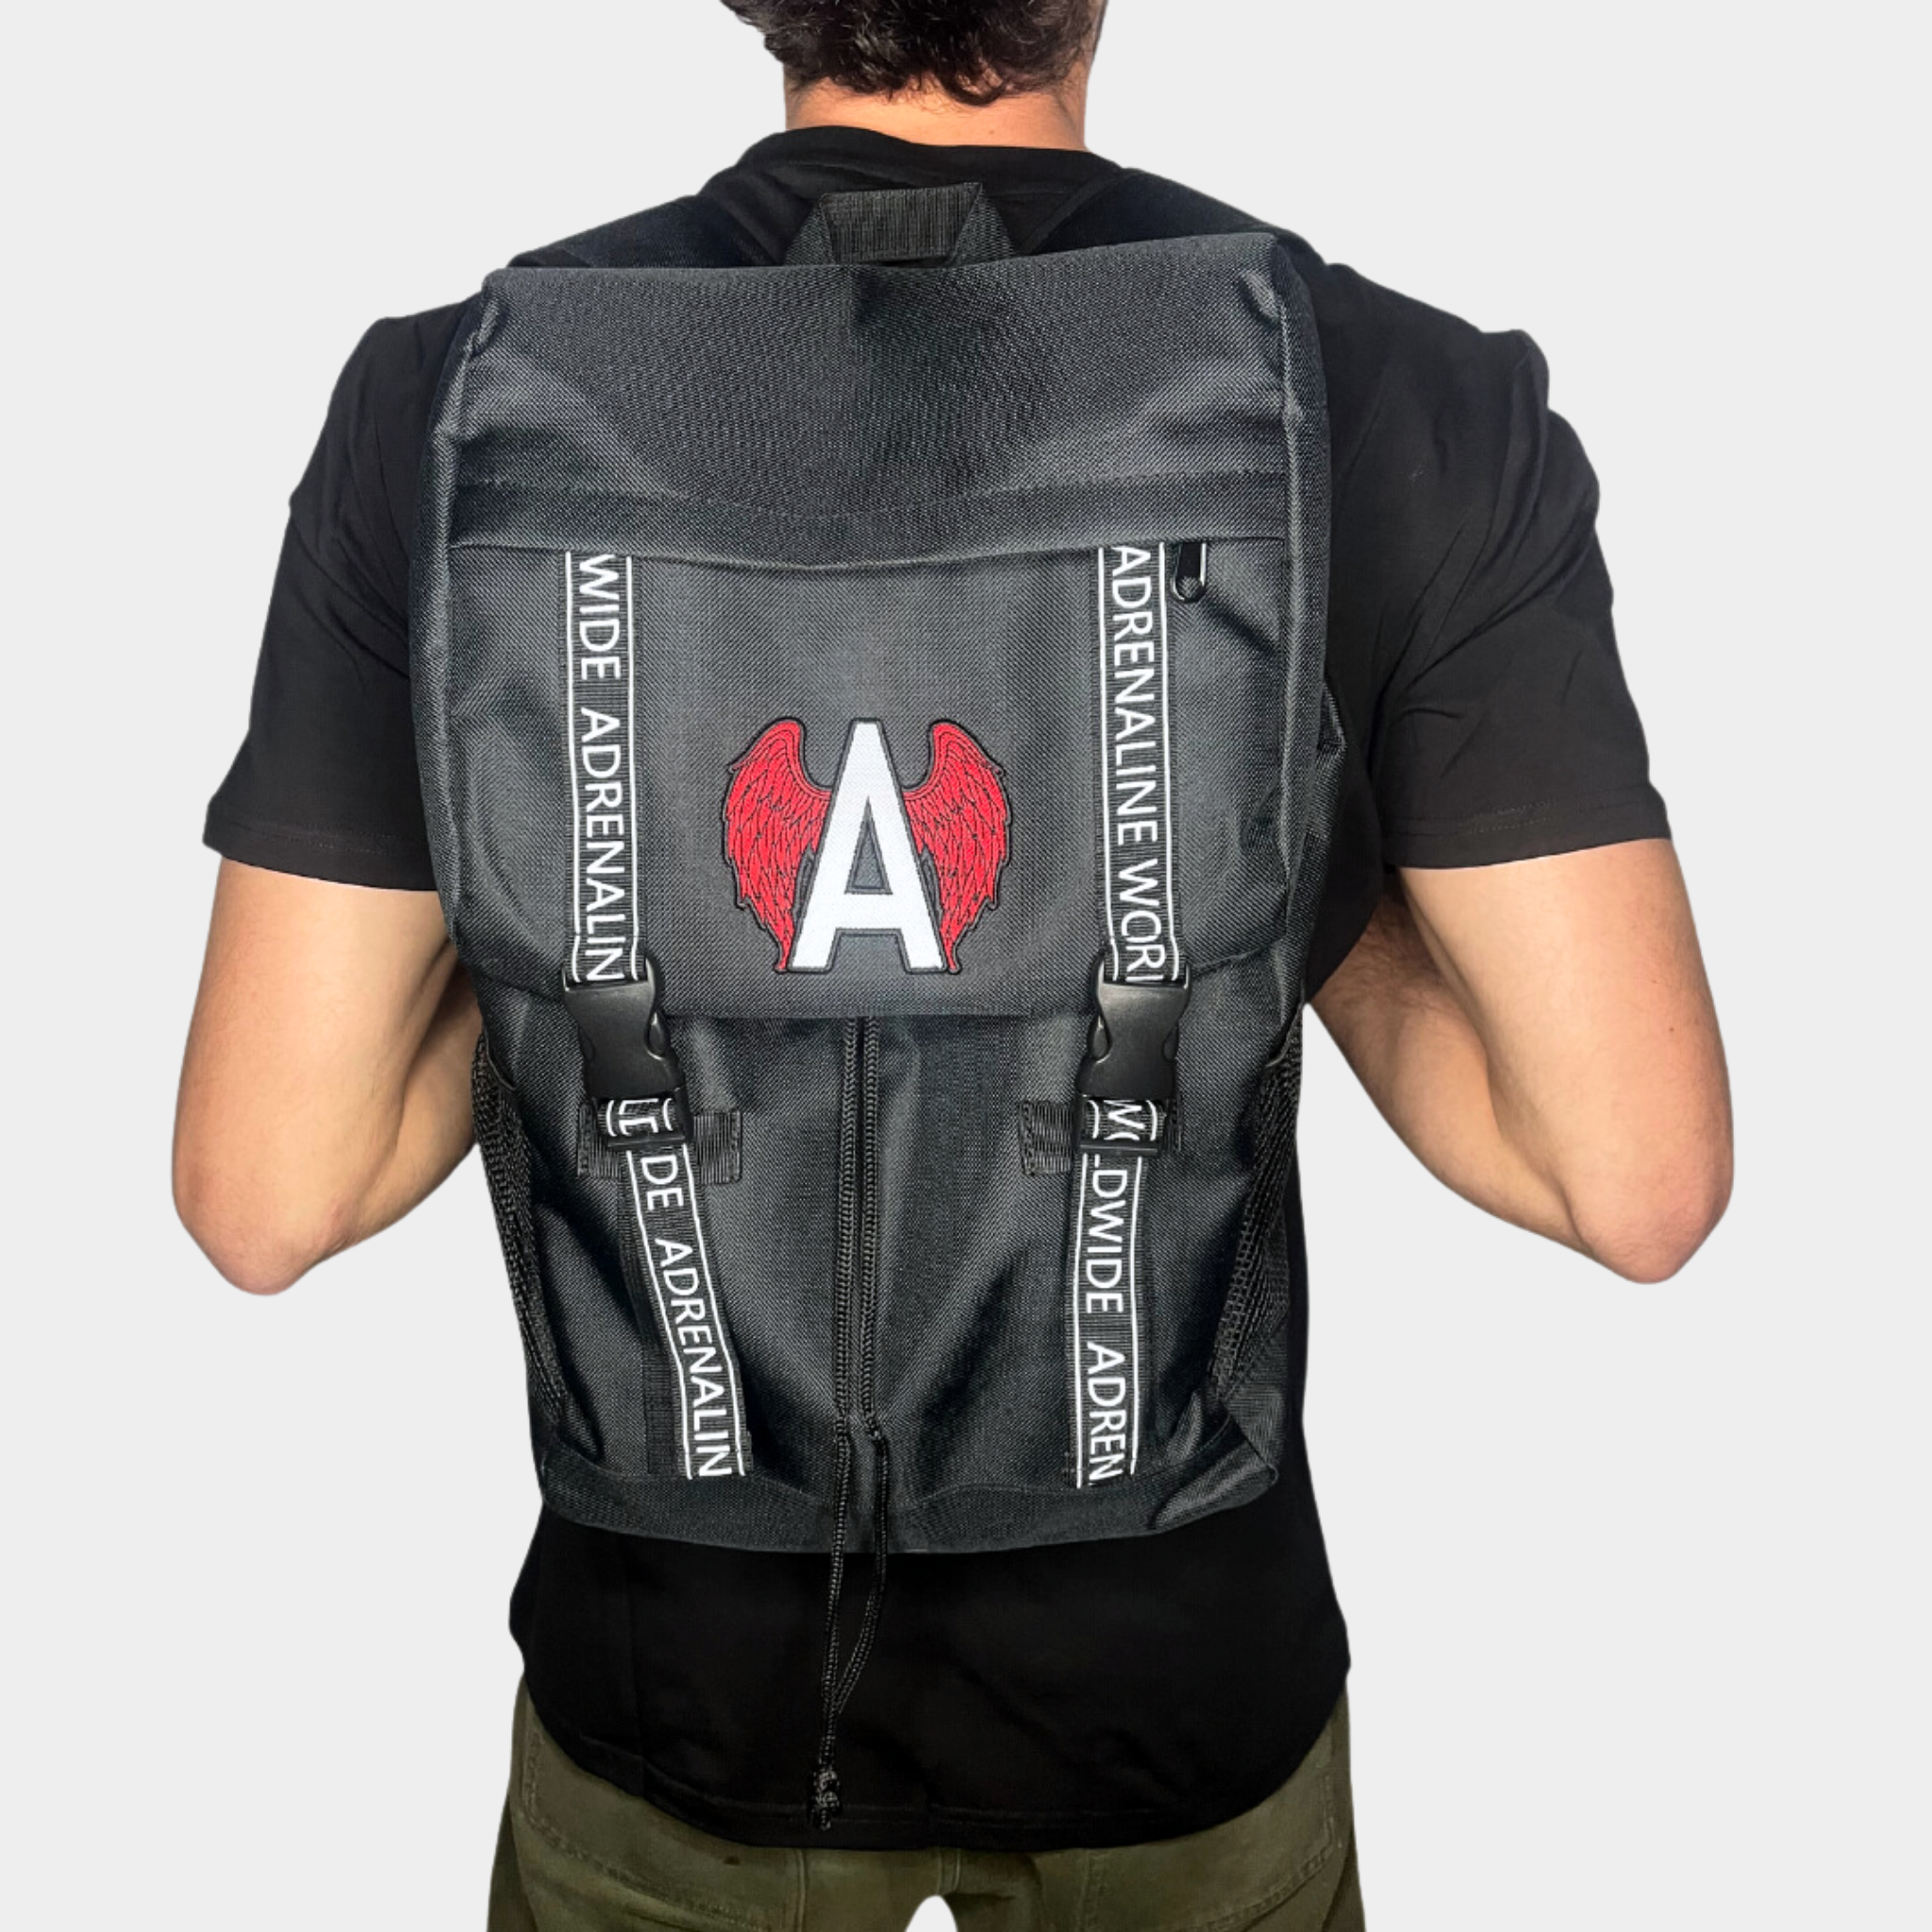 Pro Series Backpack